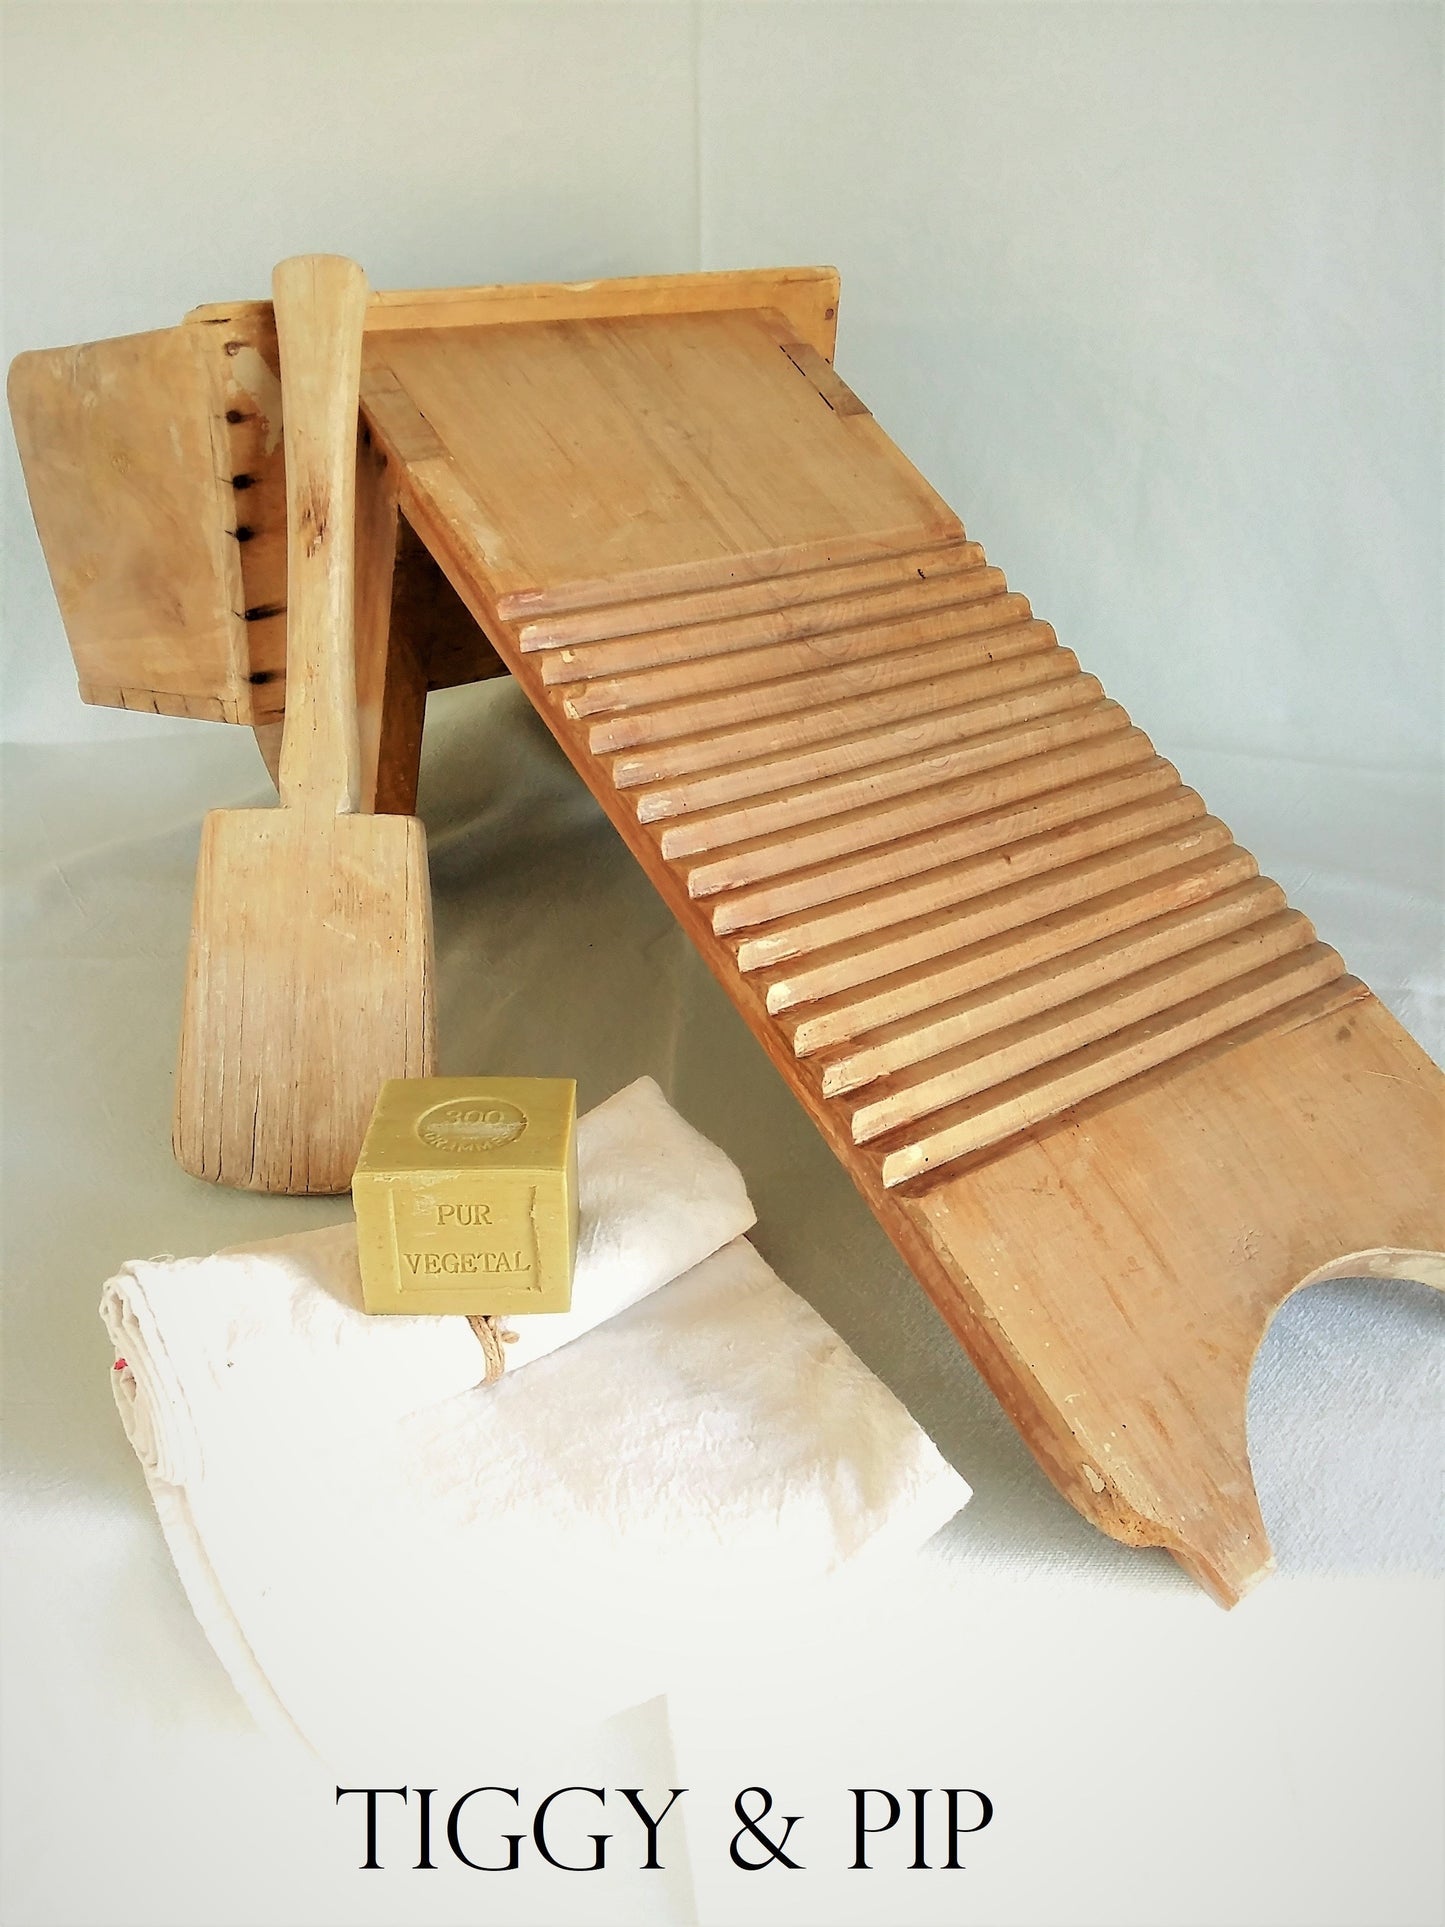 Antique Washboard and Paddle from Tiggy & Pip - Just €380! Shop now at Tiggy and Pip